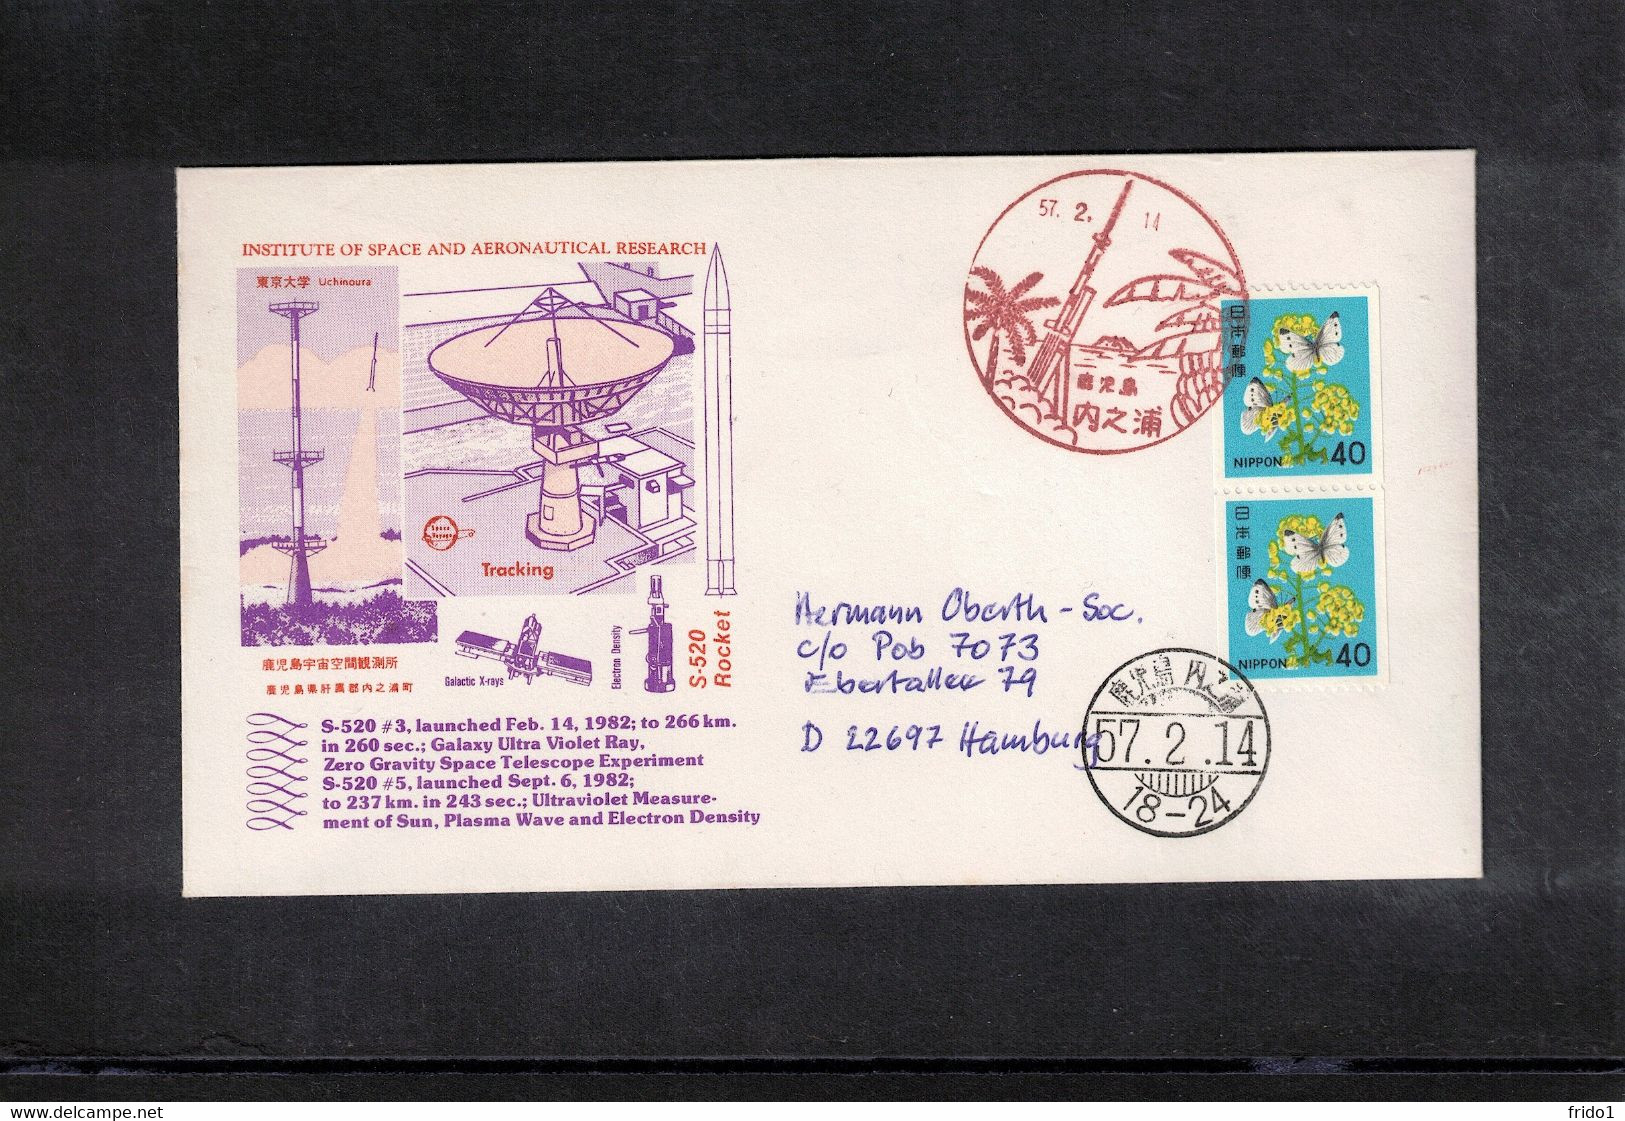 Japan 1982 Space / Raumfahrt Rocket S - 520 Tracking Interesting Cover - Asia